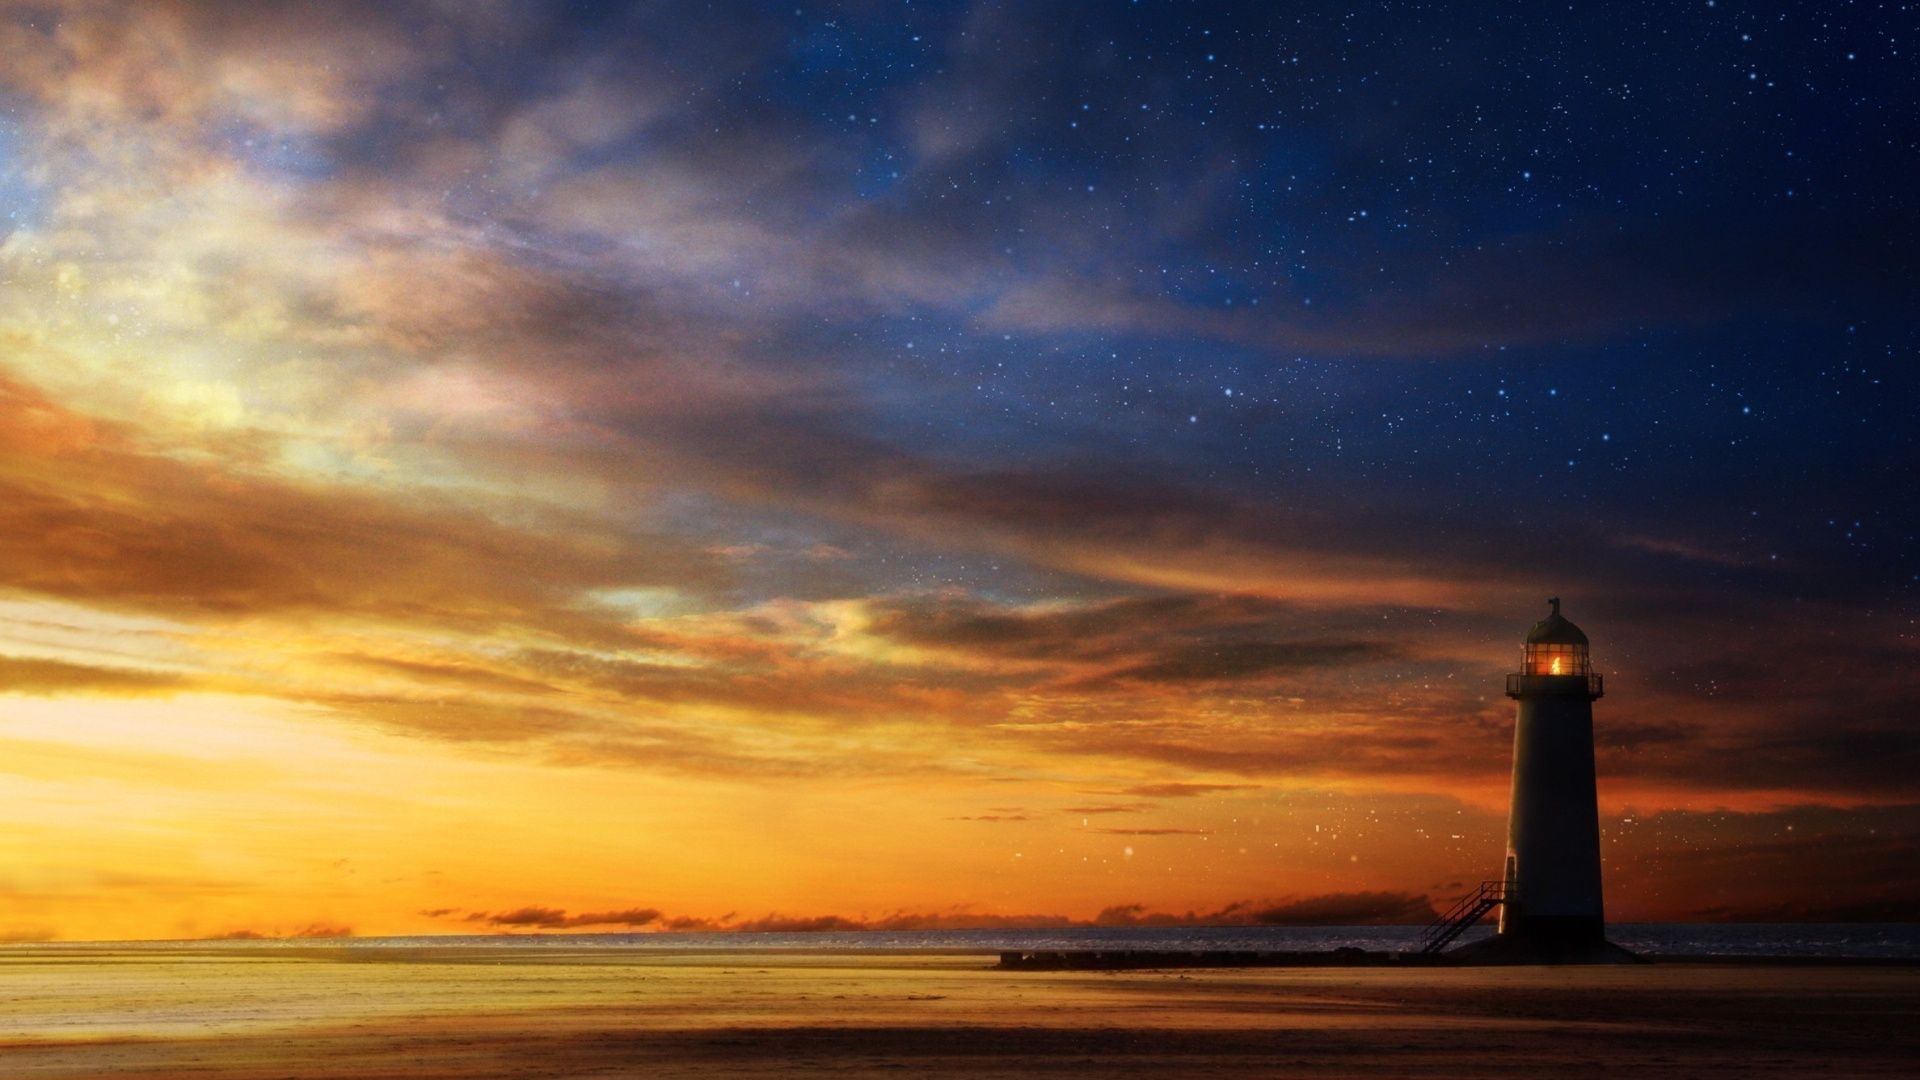 Starry Sky Wallpaper. Sunset picture, Sunset sky